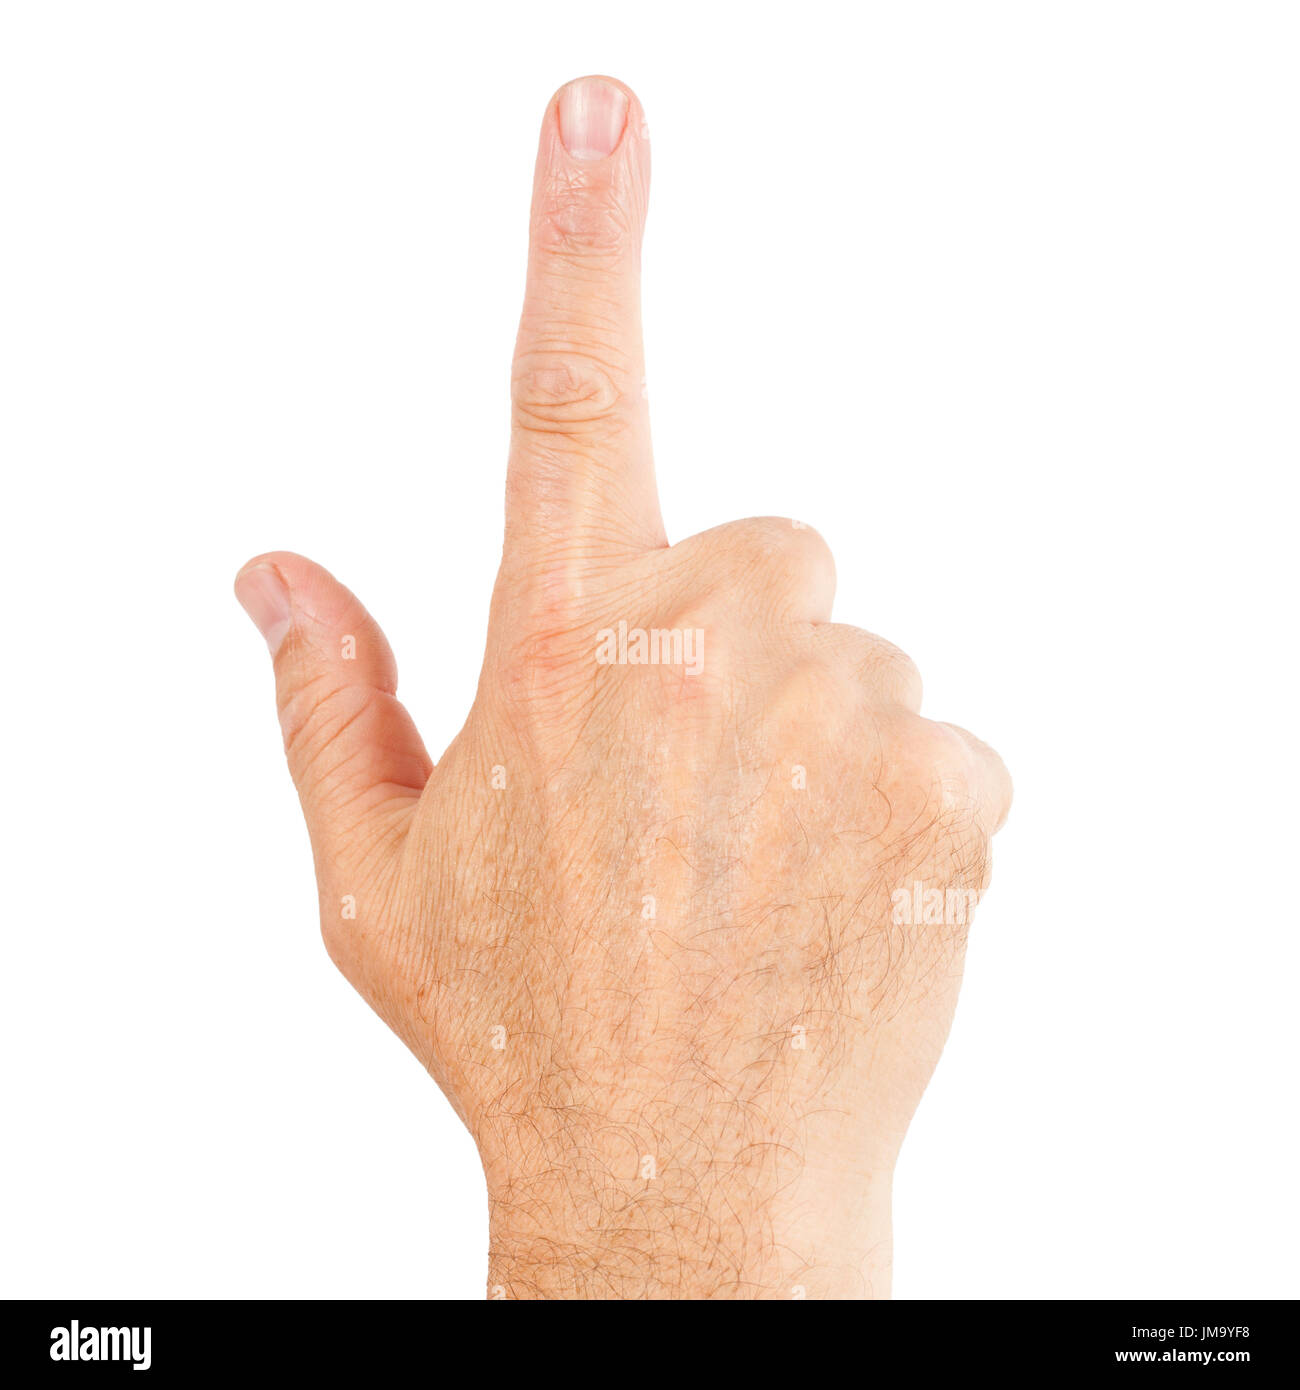 Premium Photo  A man's hand pointing a finger at something. space for text